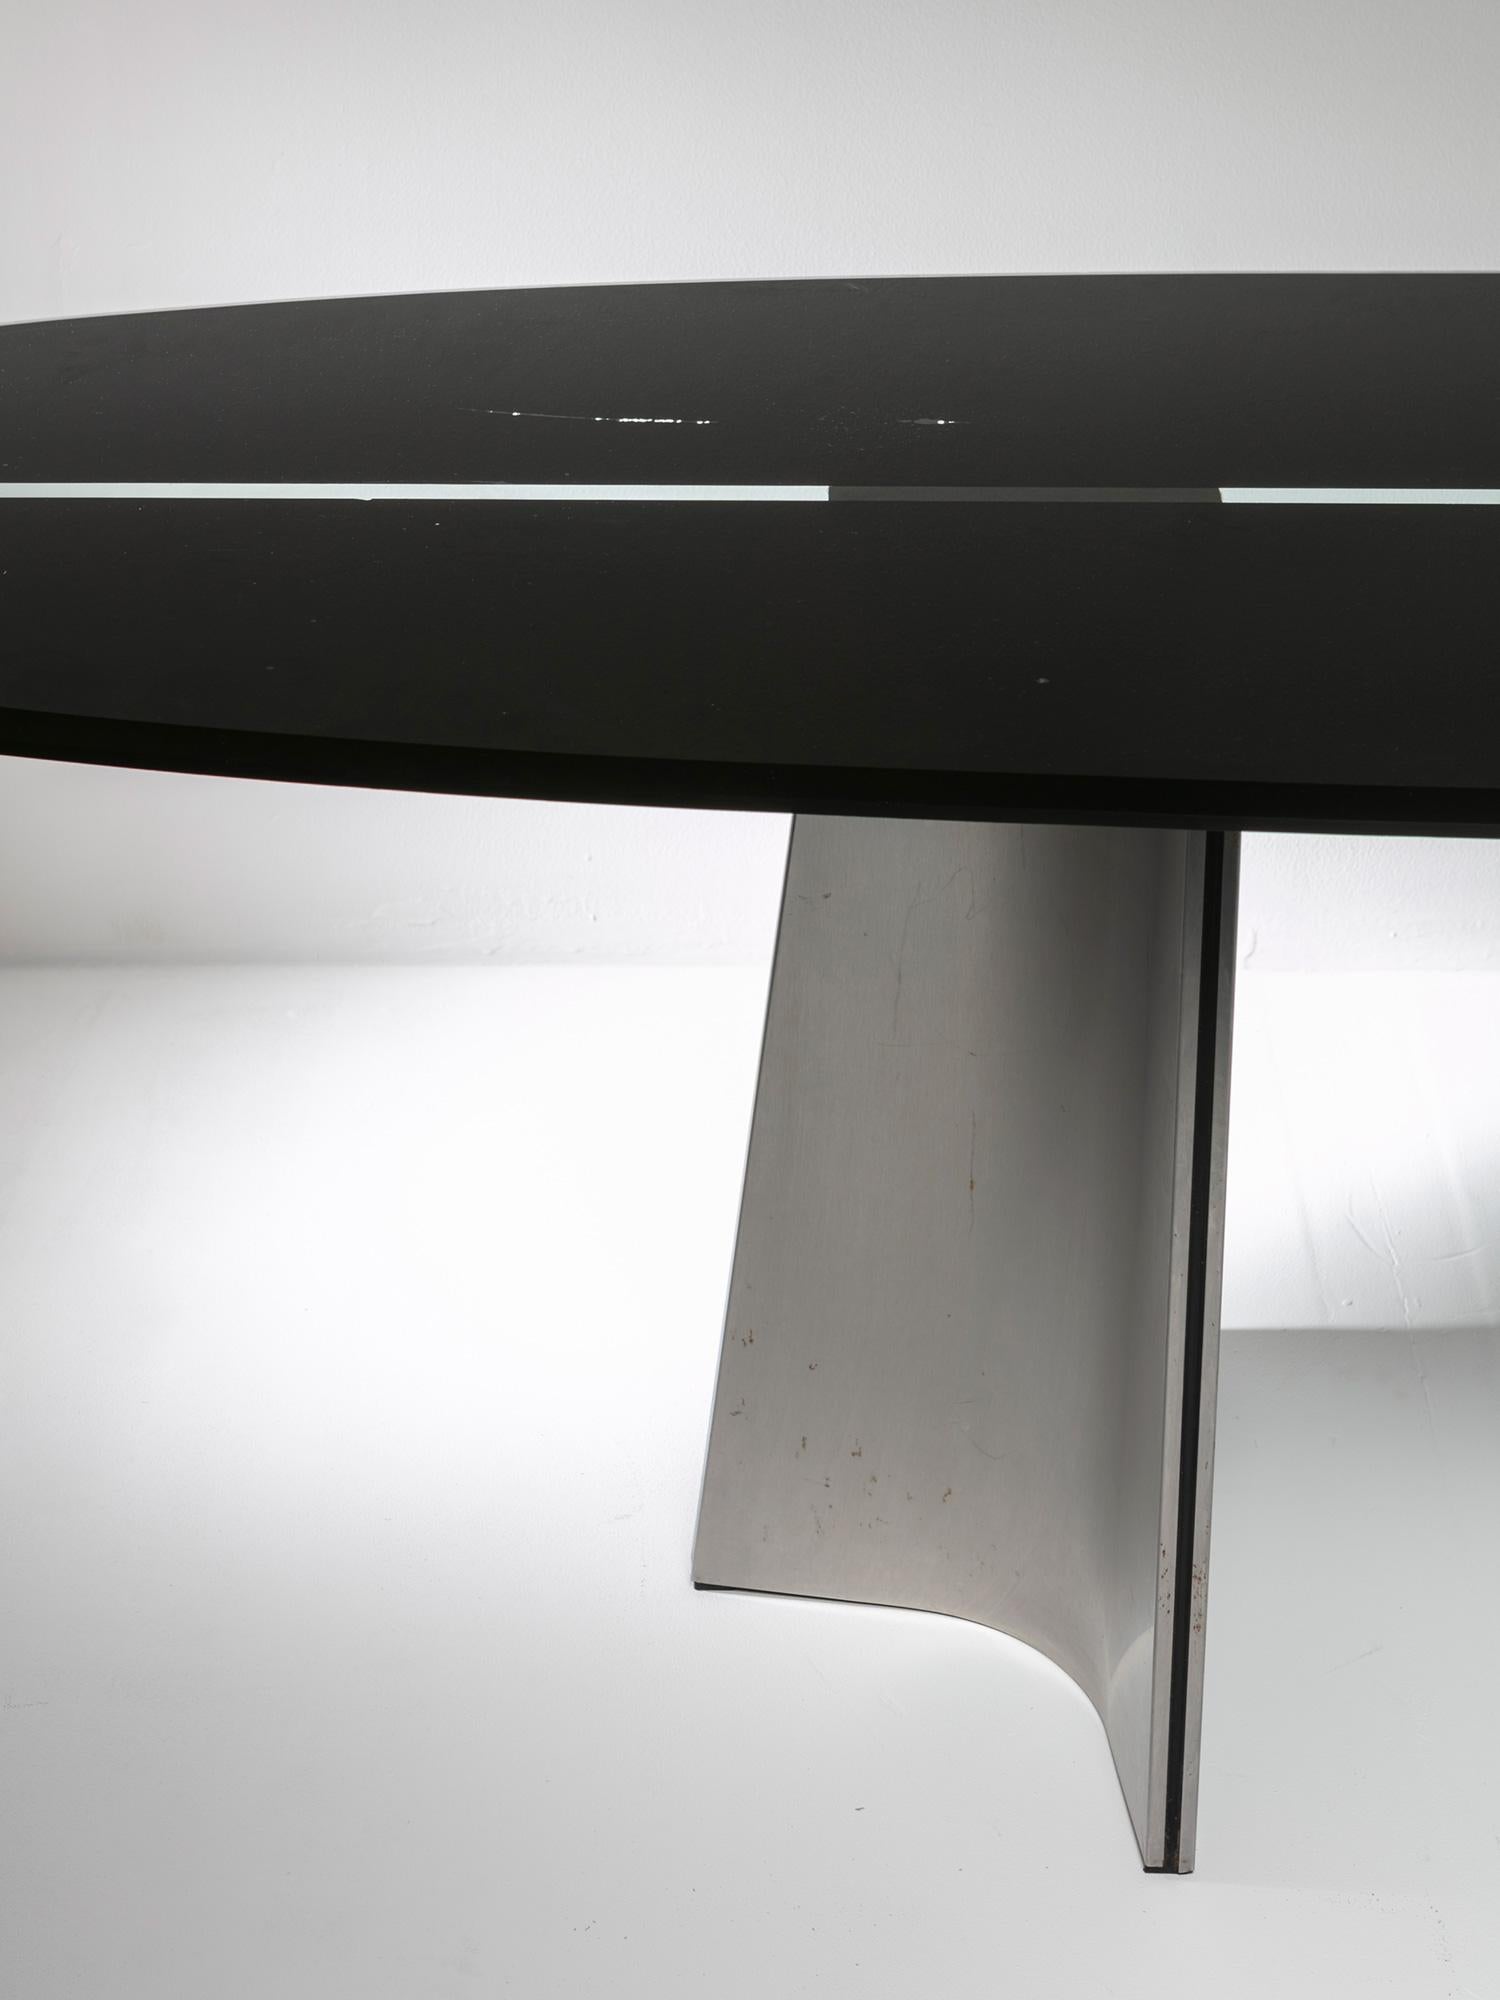 Remarkable Ufo table by Luigi Saccardo for Arrmet.
Large glass surfboard shaped top with black serigraphy and aluminum feet.